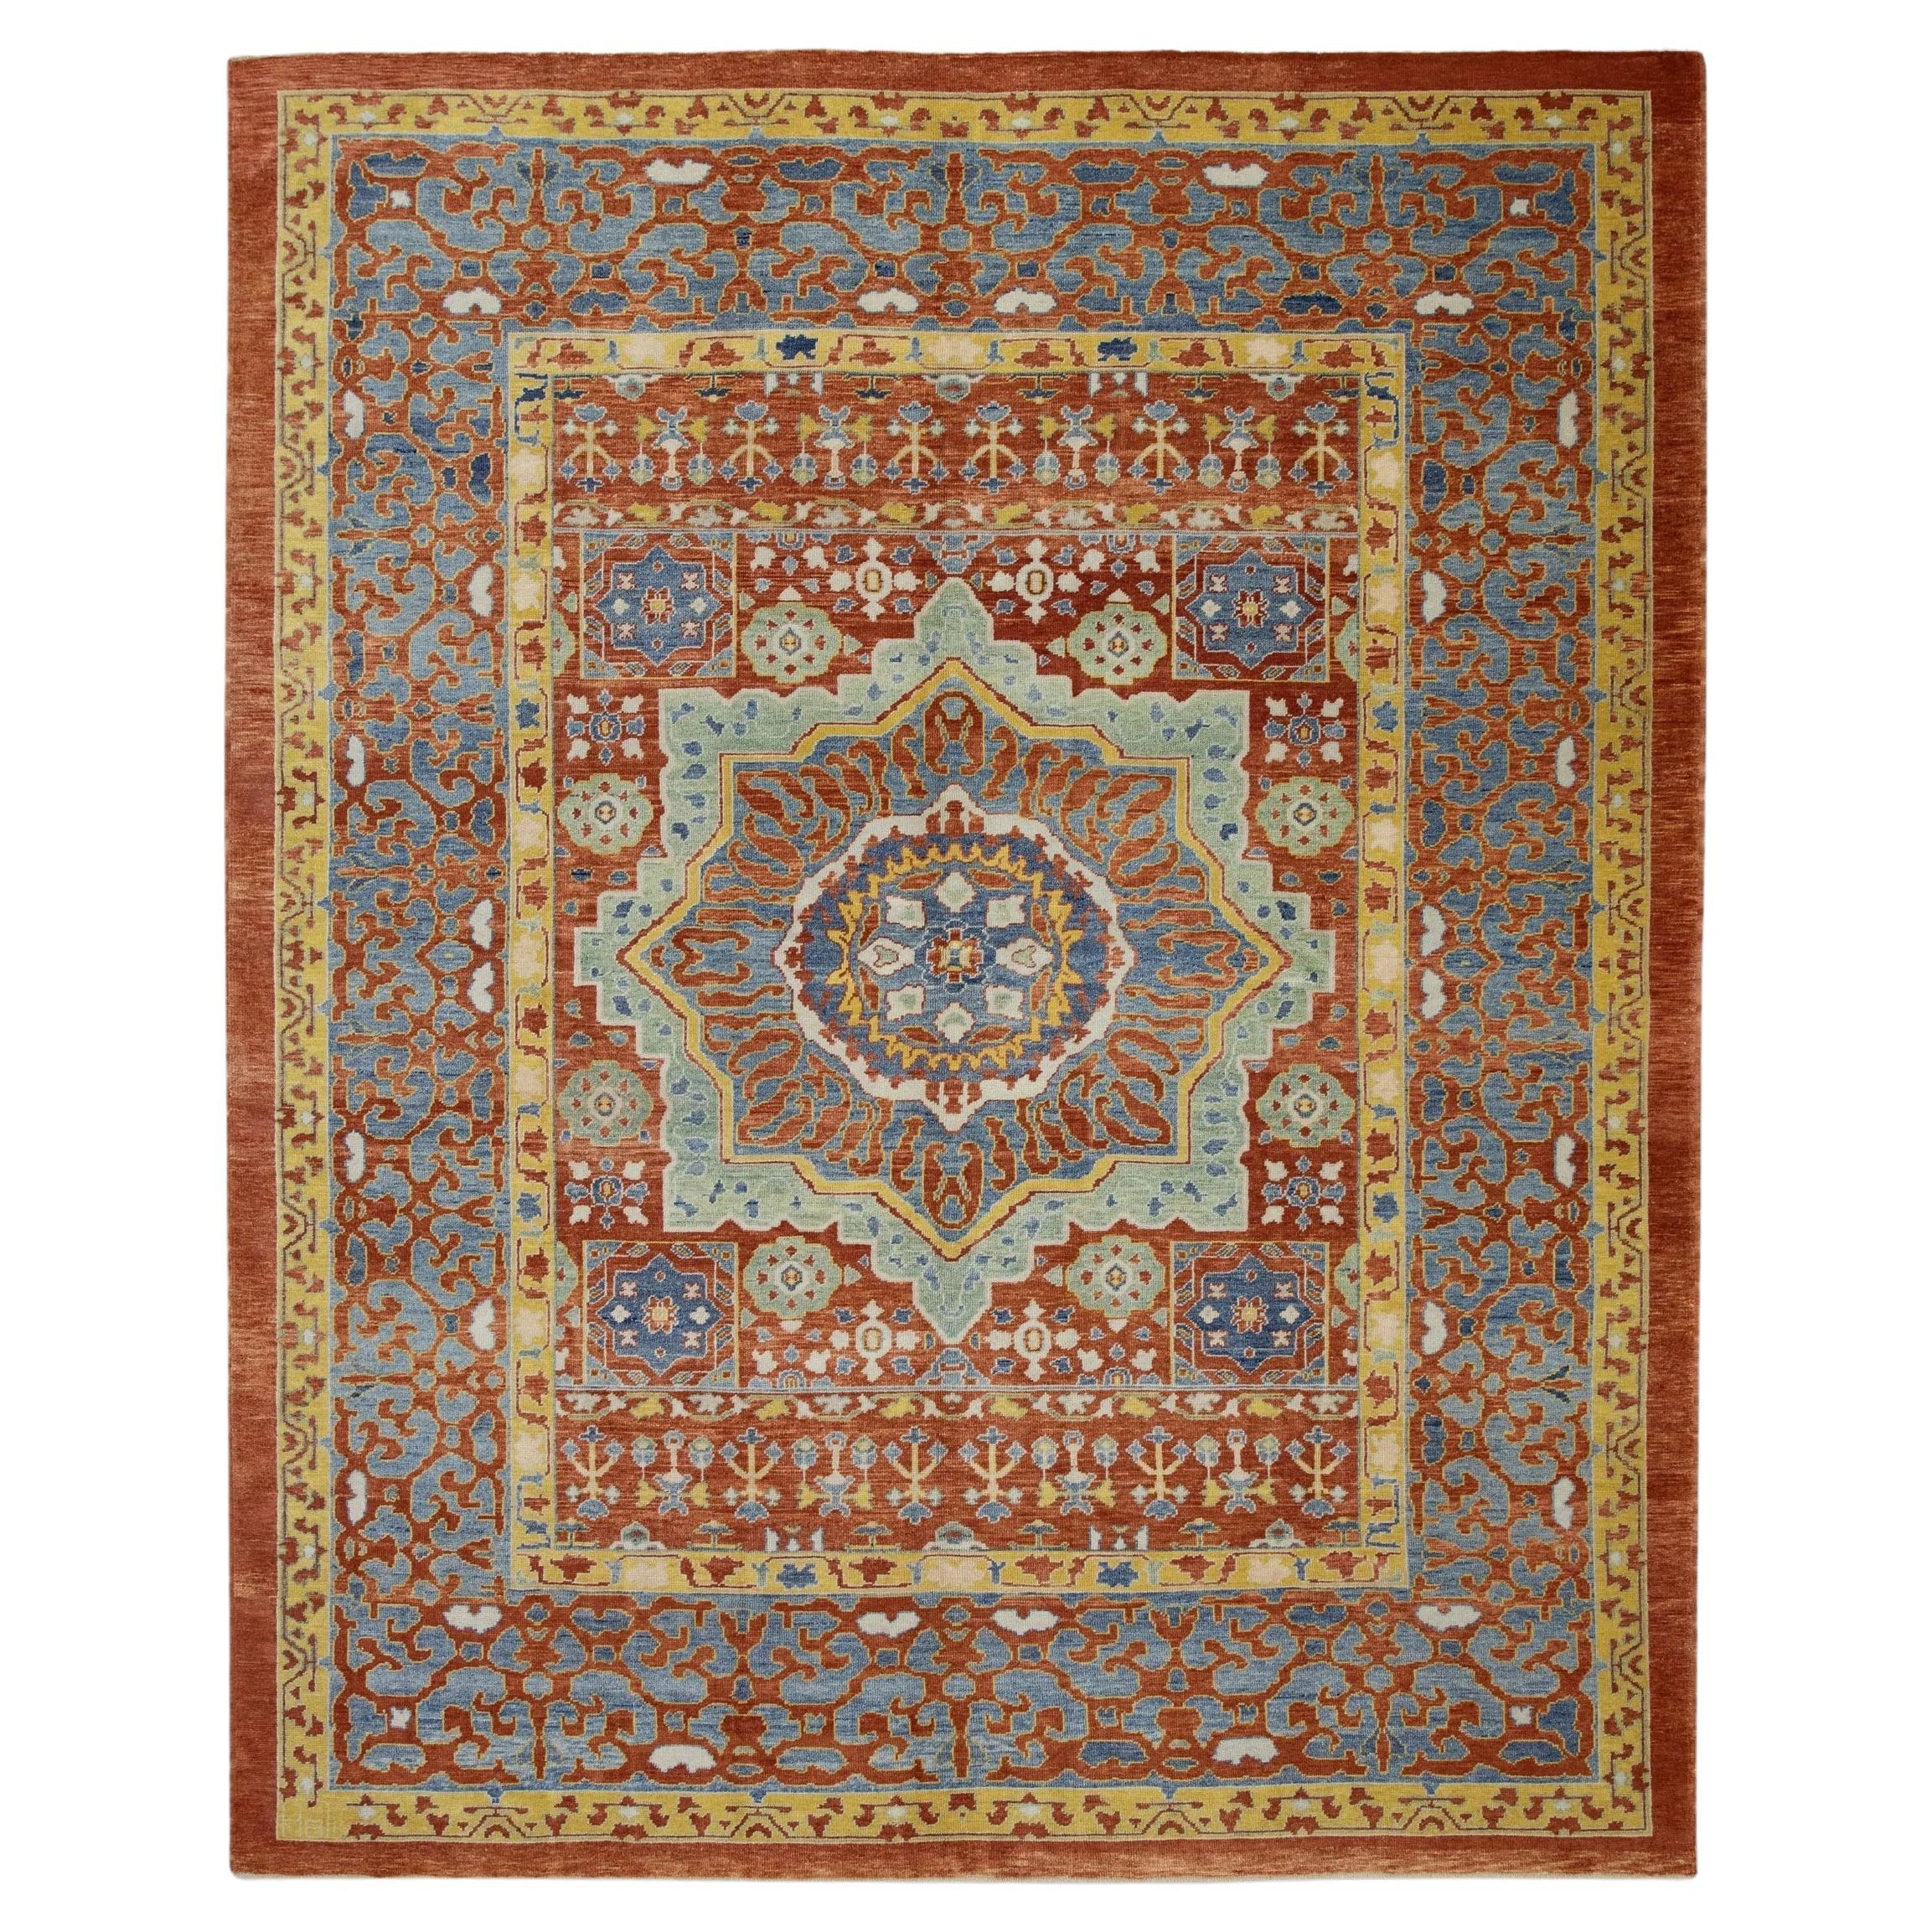 Floral Turkish Finewoven Wool Oushak Rug in Red, Blue, and Yellow 8'3" x 10'2"